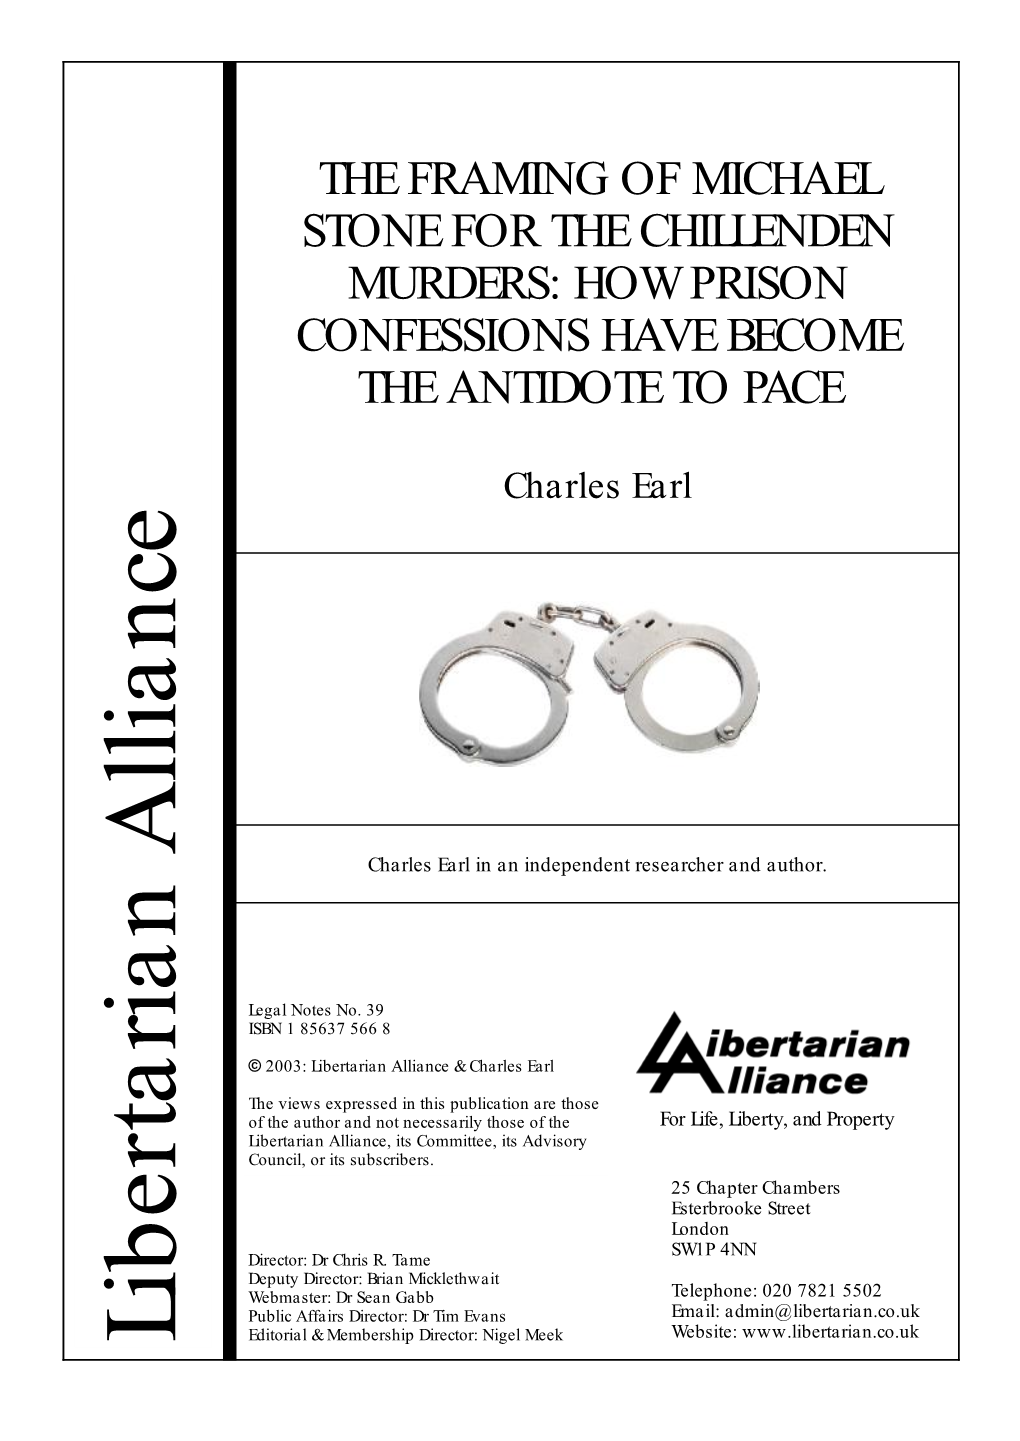 The Framing of Michael Stone for the Chillenden Murders: How Prison Confessions Have Become the Antidote to Pace